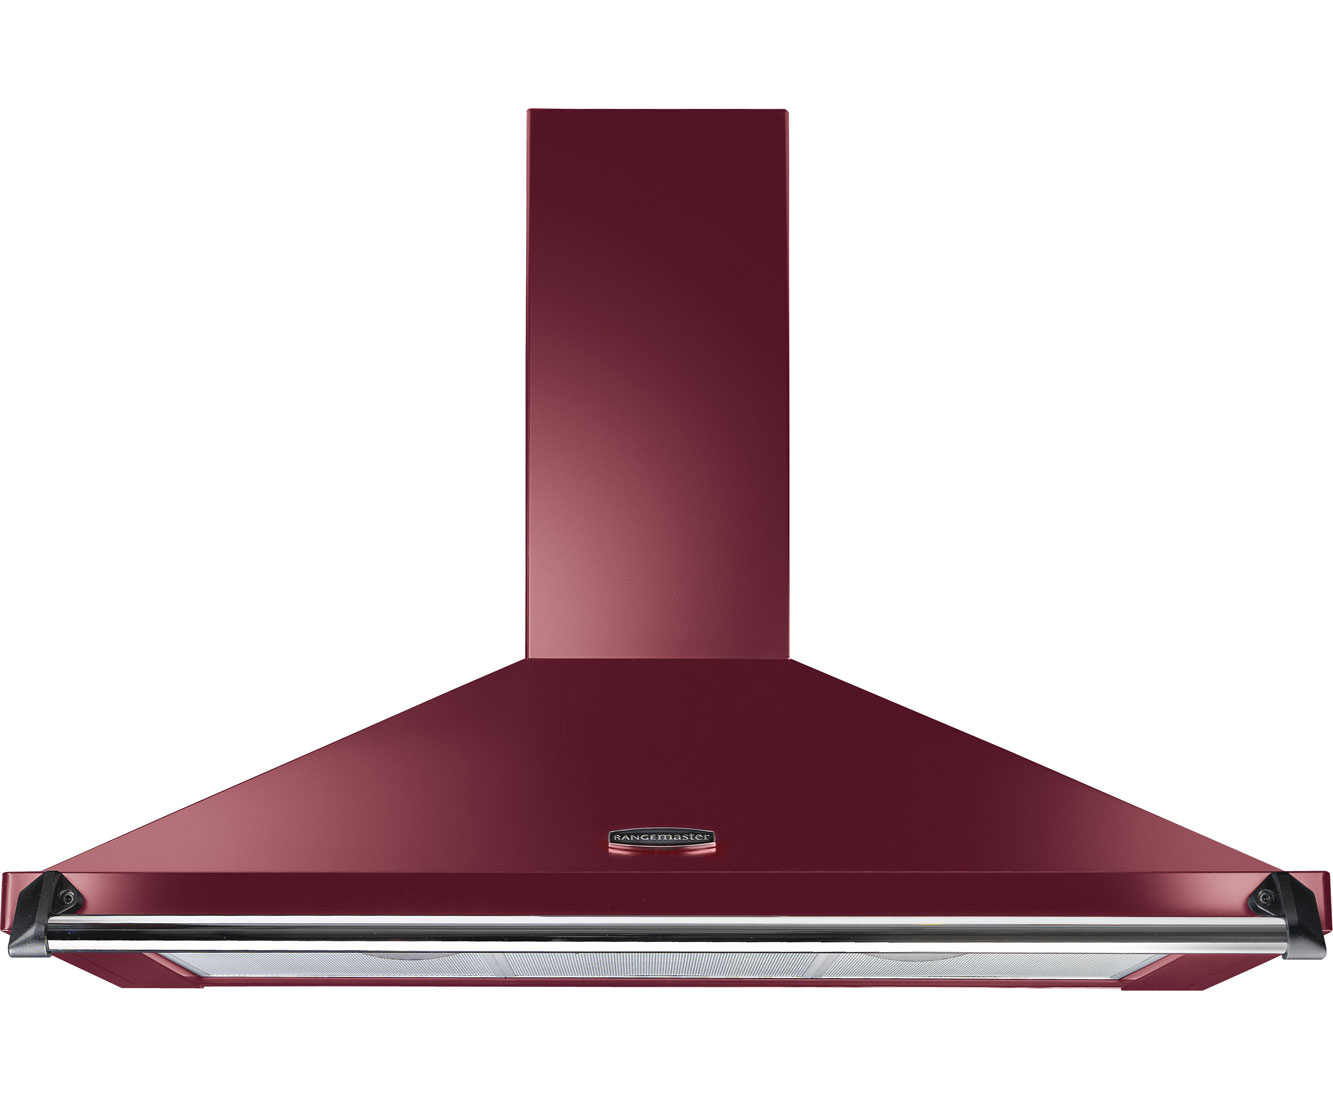 Rangemaster Classic CLAHDC100CY/C Integrated Cooker Hood in Cranberry / Chrome